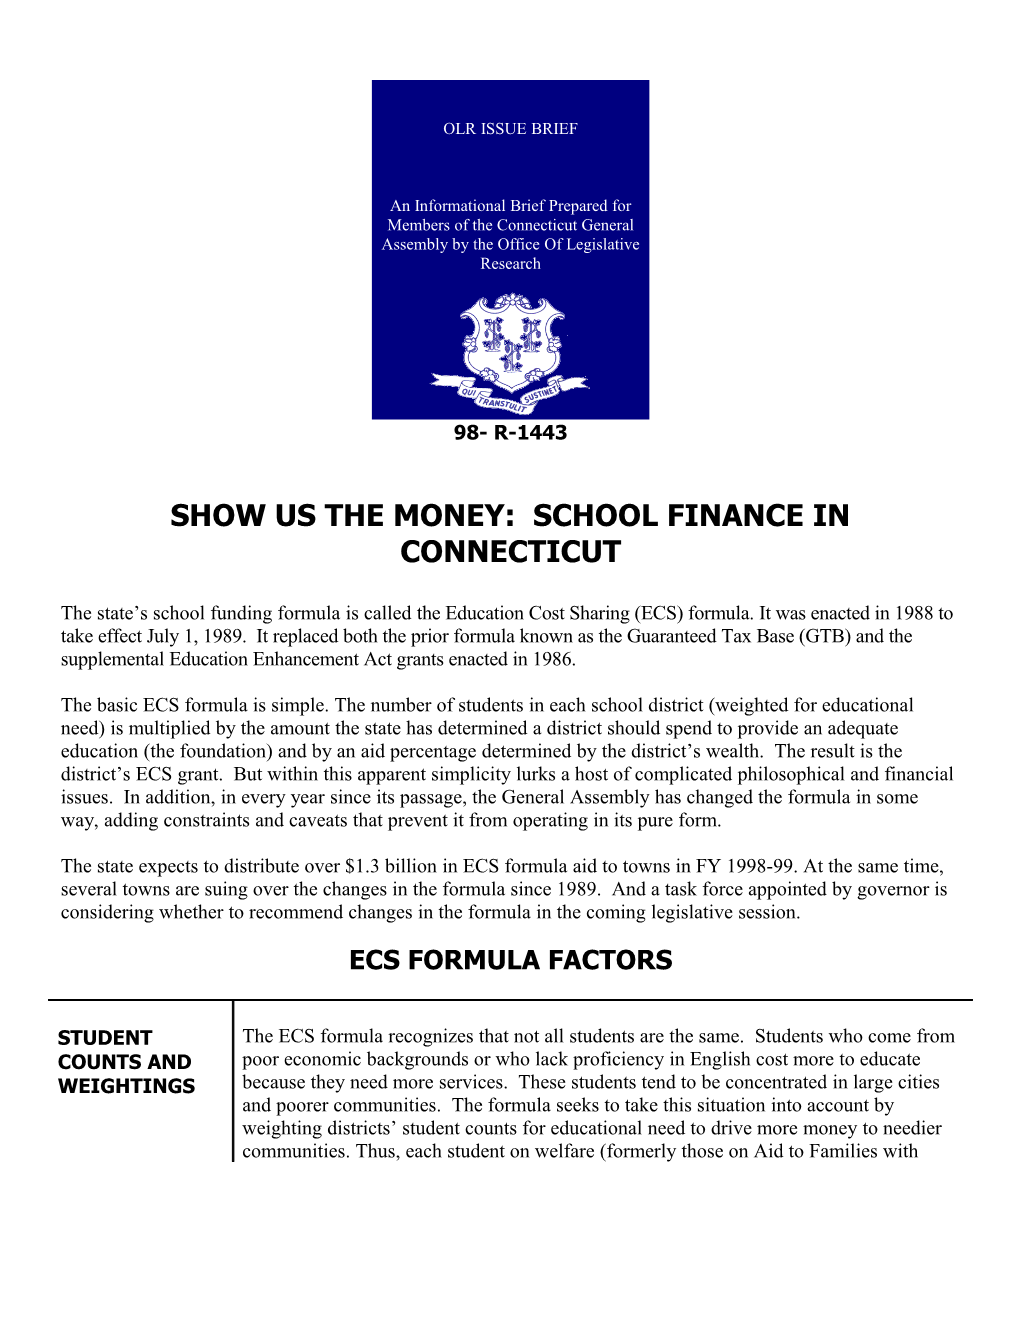 Show Us the Money: School Finance in Connecticut